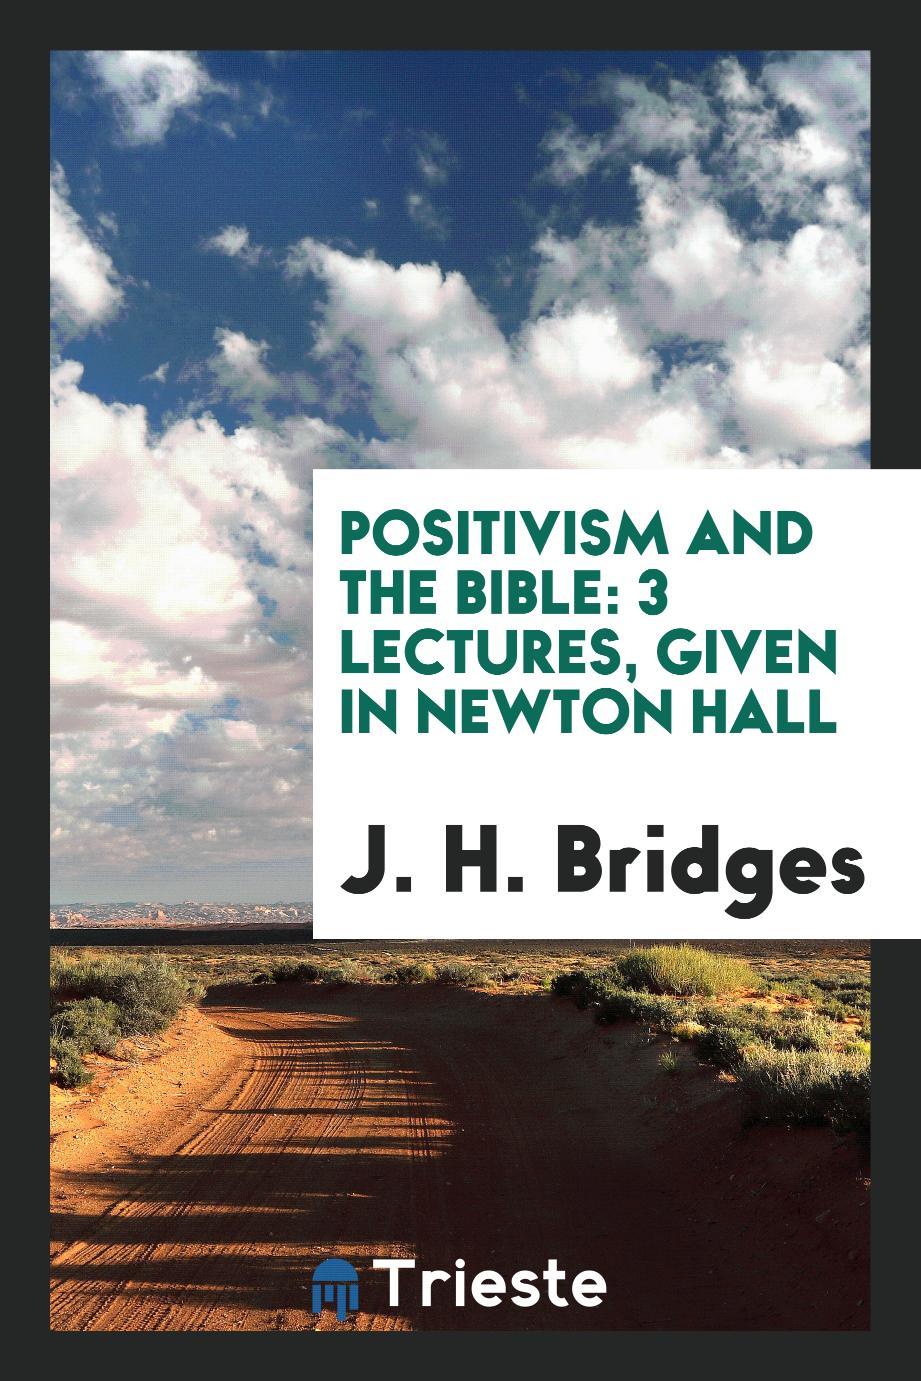 Positivism and the Bible: 3 lectures, given in Newton Hall